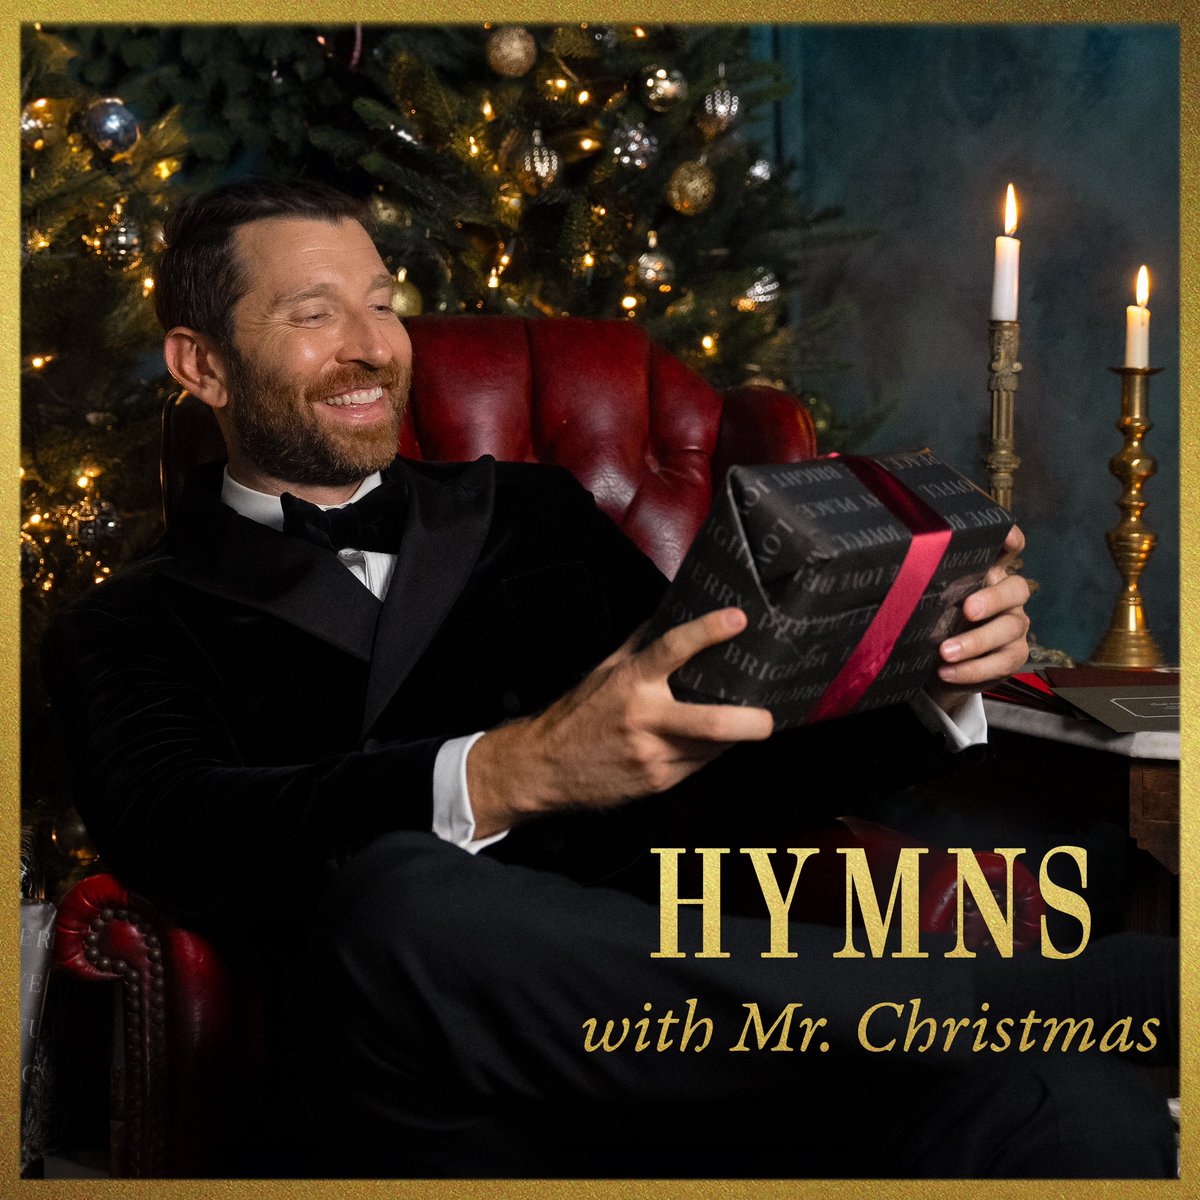 Get in the holiday spirit with a collection of my favorite hymns, 'Hymns with Mr. Christmas’🔔🎄🎶 bretteldredge.lnk.to/hymns